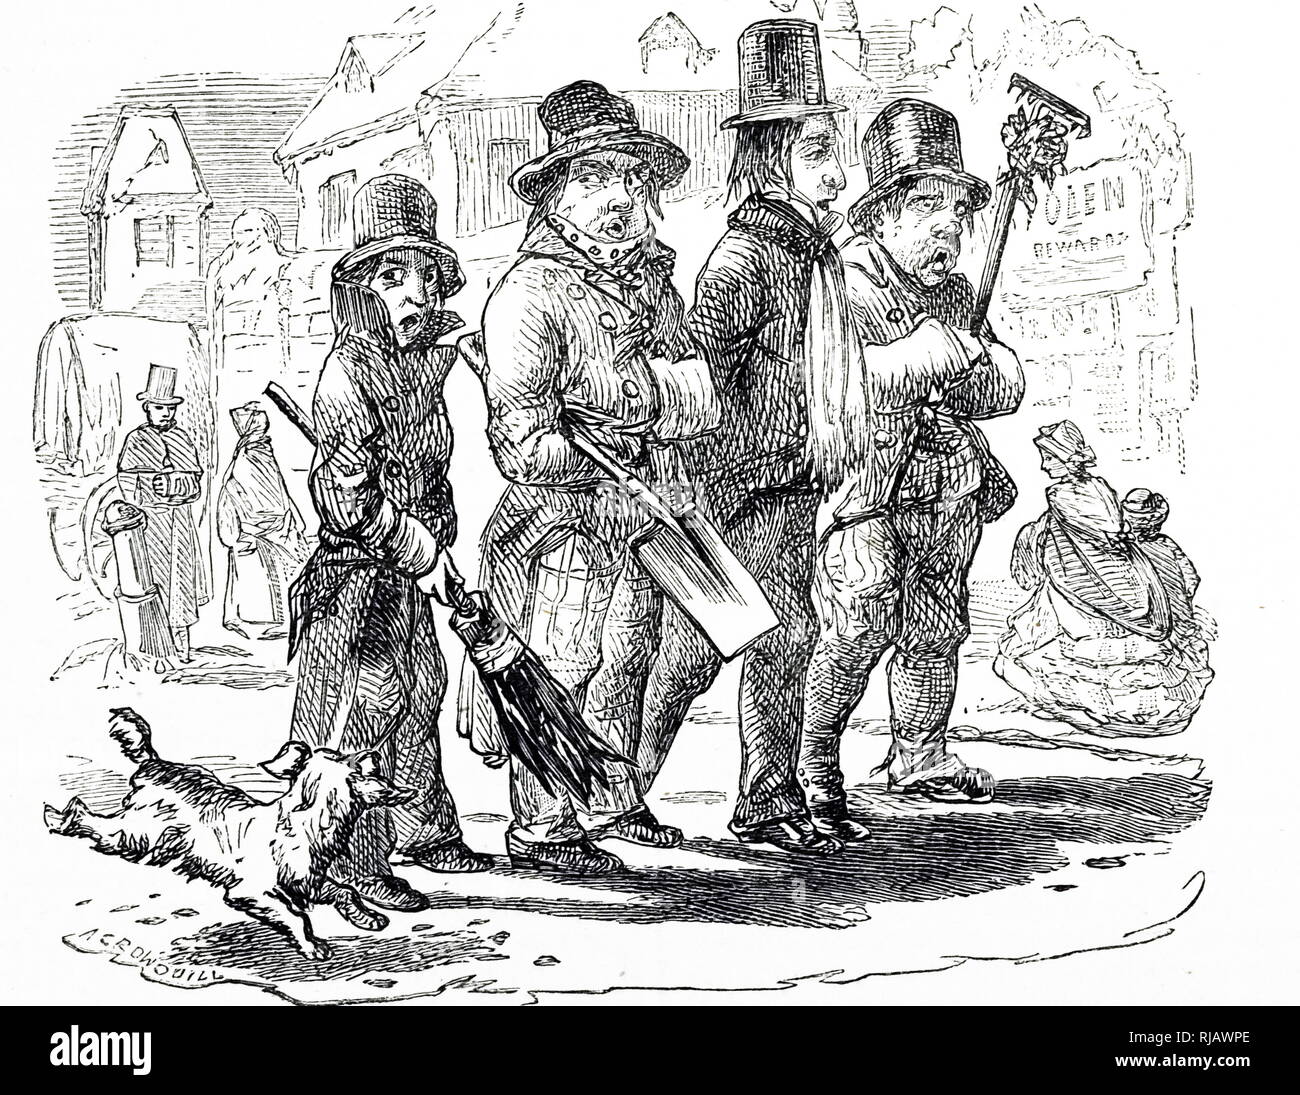 A cartoon titled 'Frozen-out Gardeners' - opportunists pretending to be gardeners to excite charity in more affluent classes. Dated 19th century Stock Photo